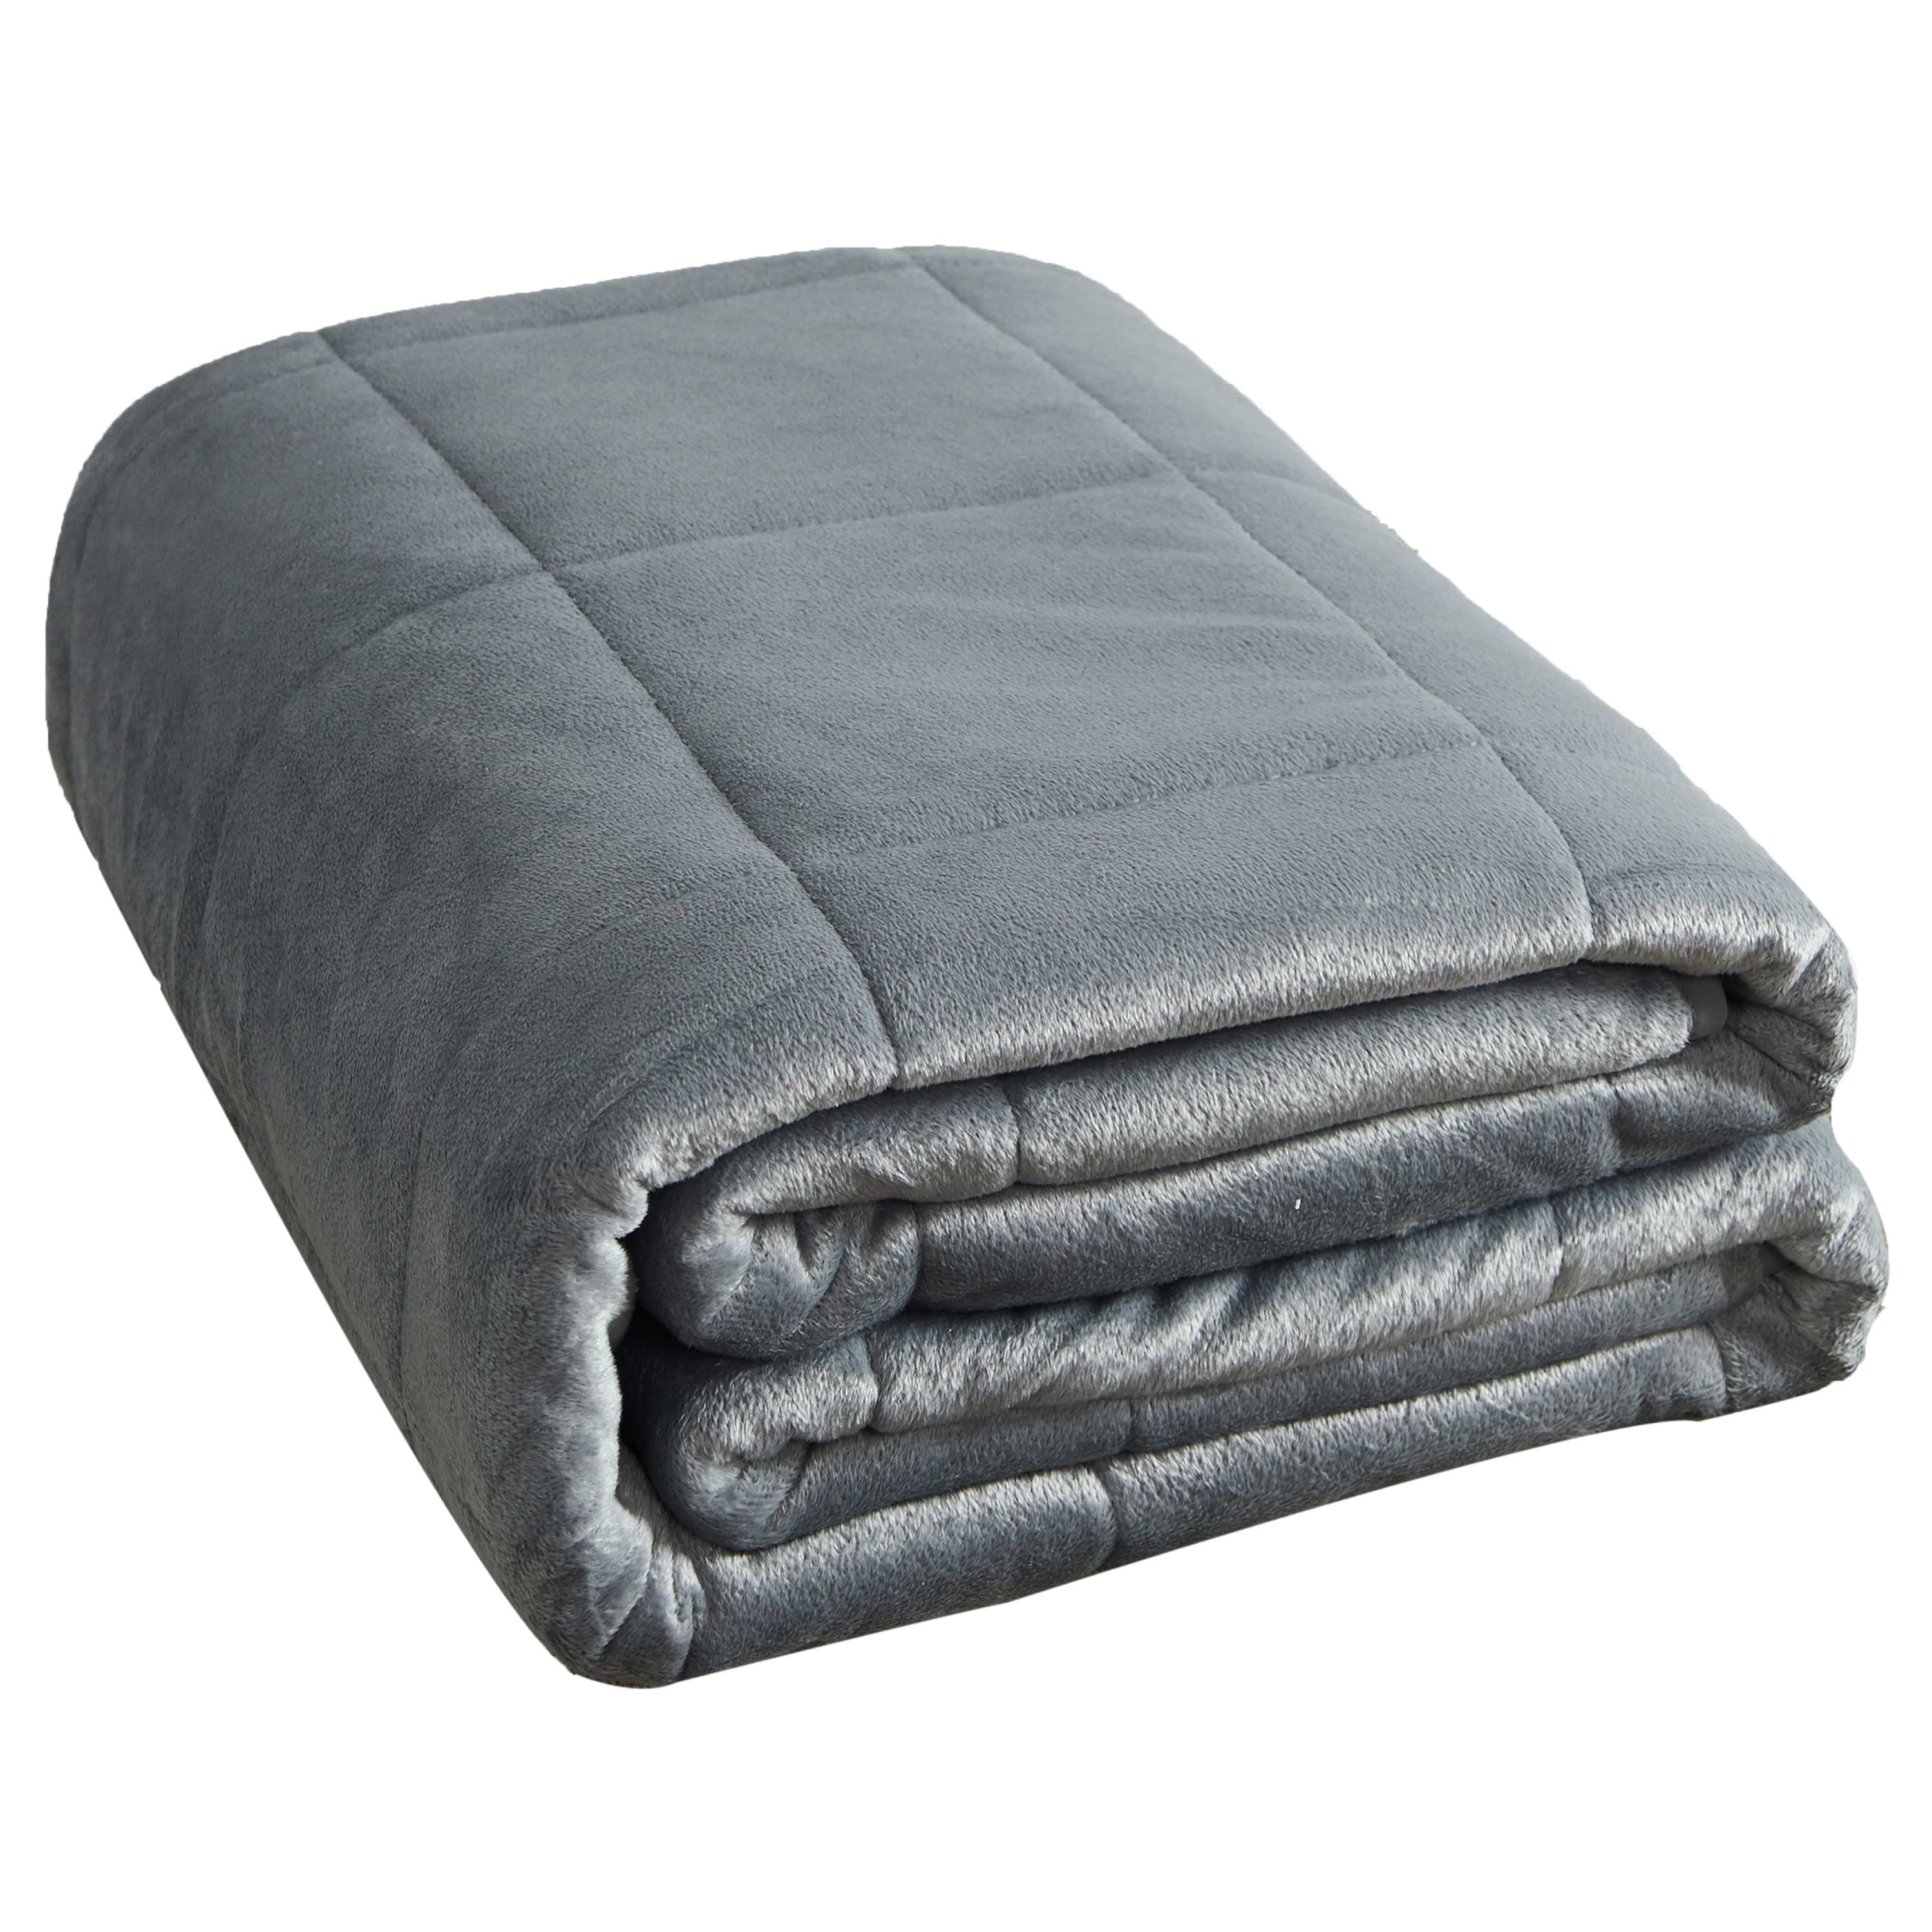 Dream Theory 15 lbs Mink to Mink Weighted Blanket - Walmart.com